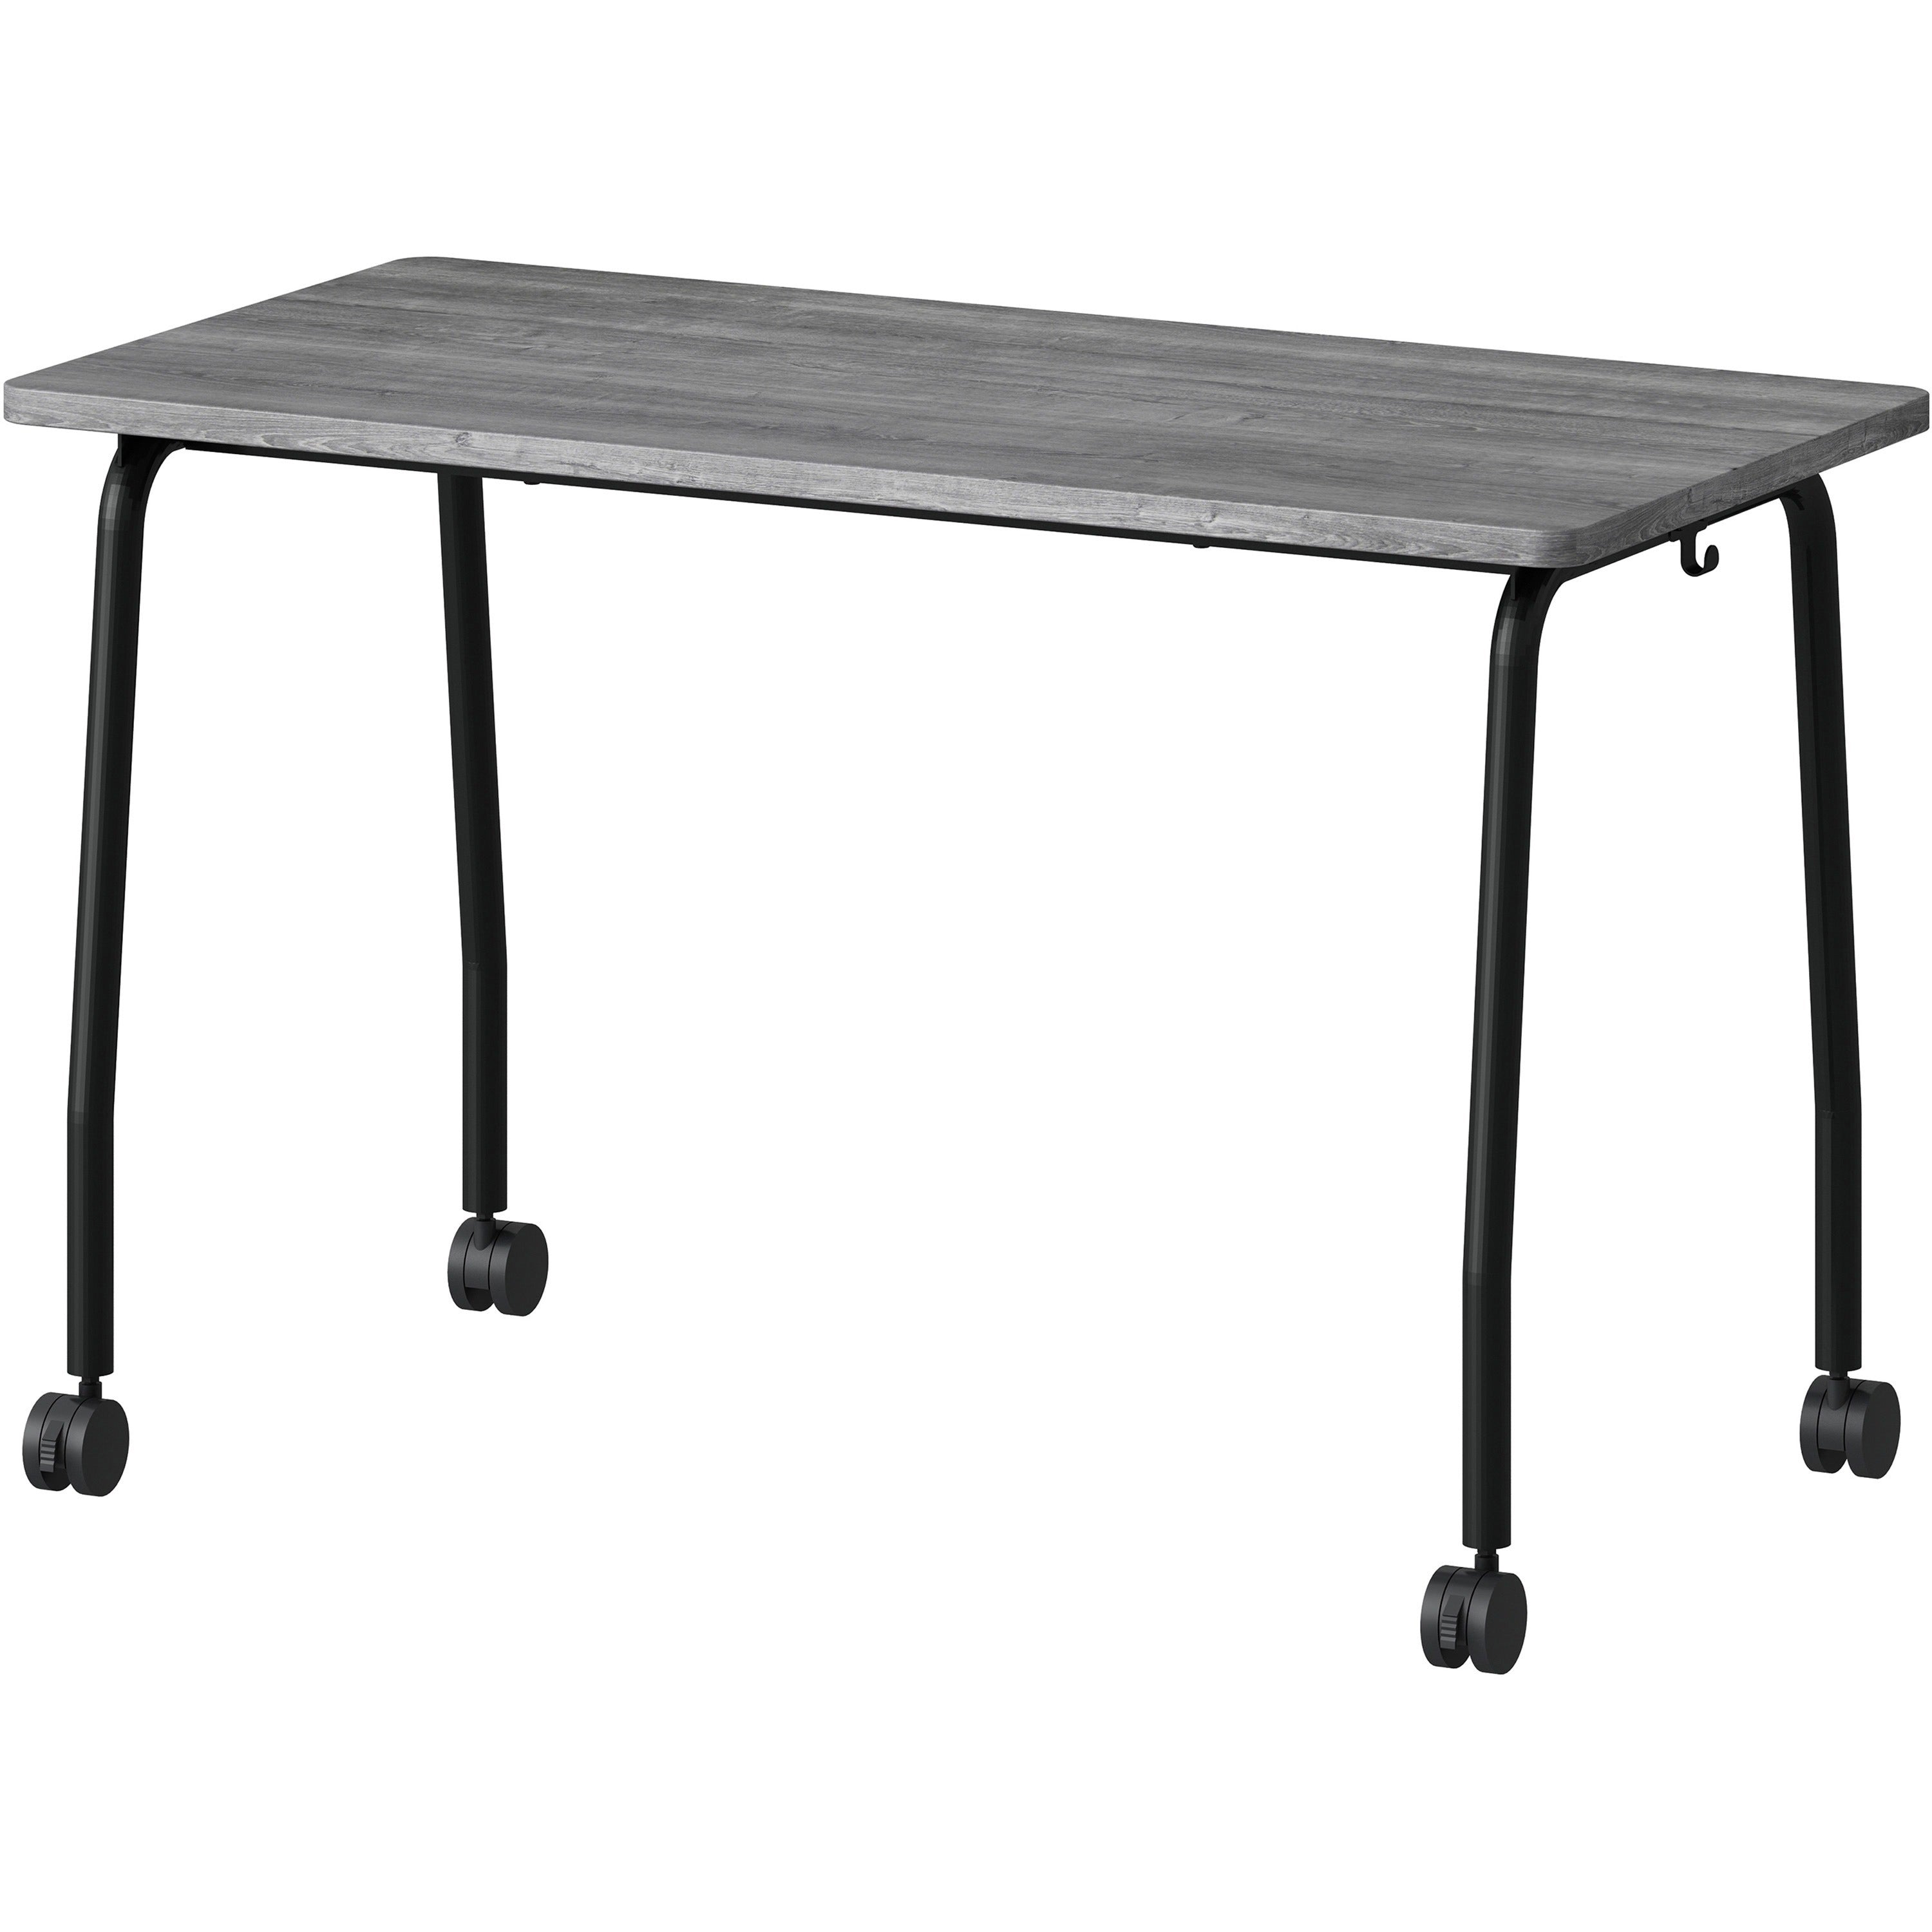 Lorell Training Table - For - Table TopLaminated Top - 300 lb Capacity - 29.50" Table Top Length x 23.63" Table Top Width x 1" Table Top Thickness - 47.25" Height - Assembly Required - Weathered Charcoal - Particleboard Top Material - 1 Each - 4